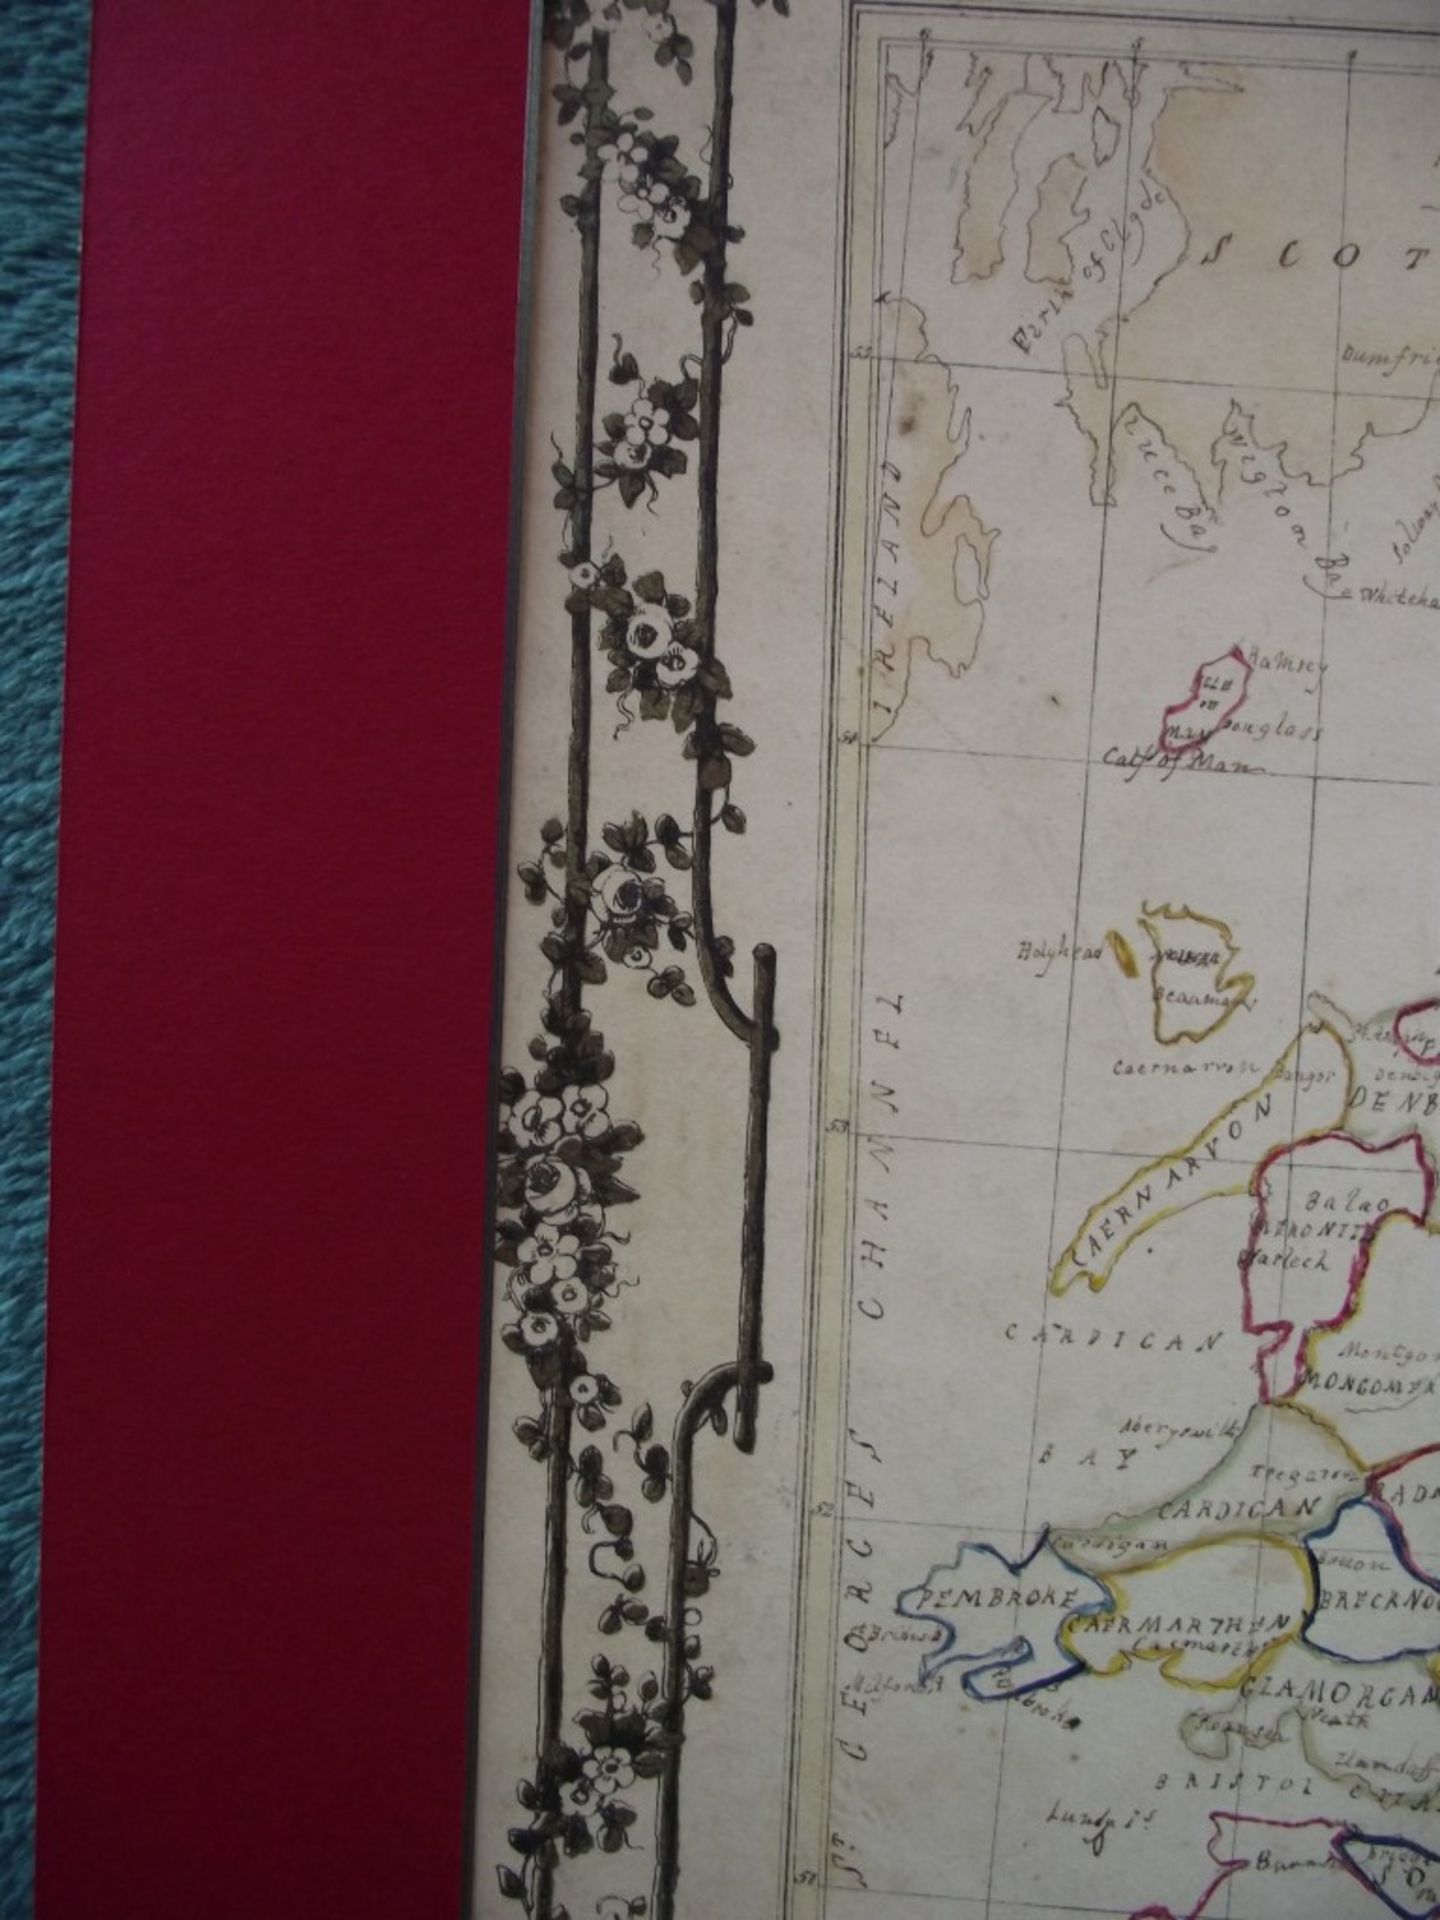 2 x 19th Century Hand Drawn Maps - Signed & Dated By Jane Edwards 1860 - Image 7 of 34